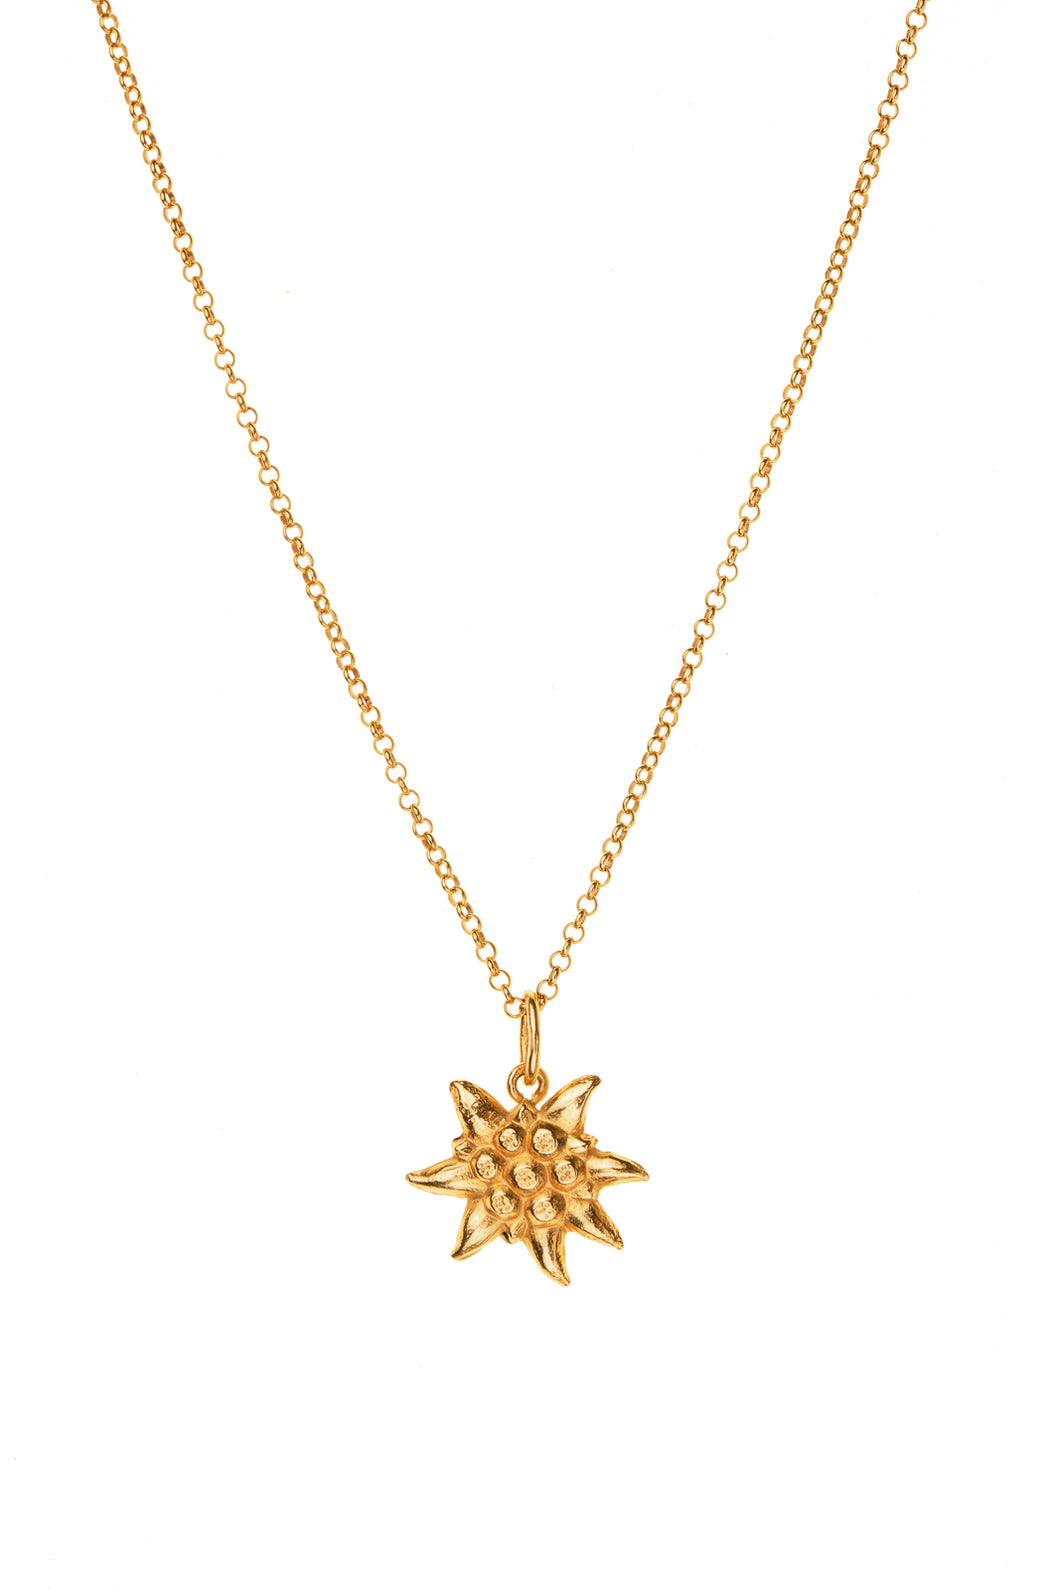 Gold Sunflower Charm Necklace